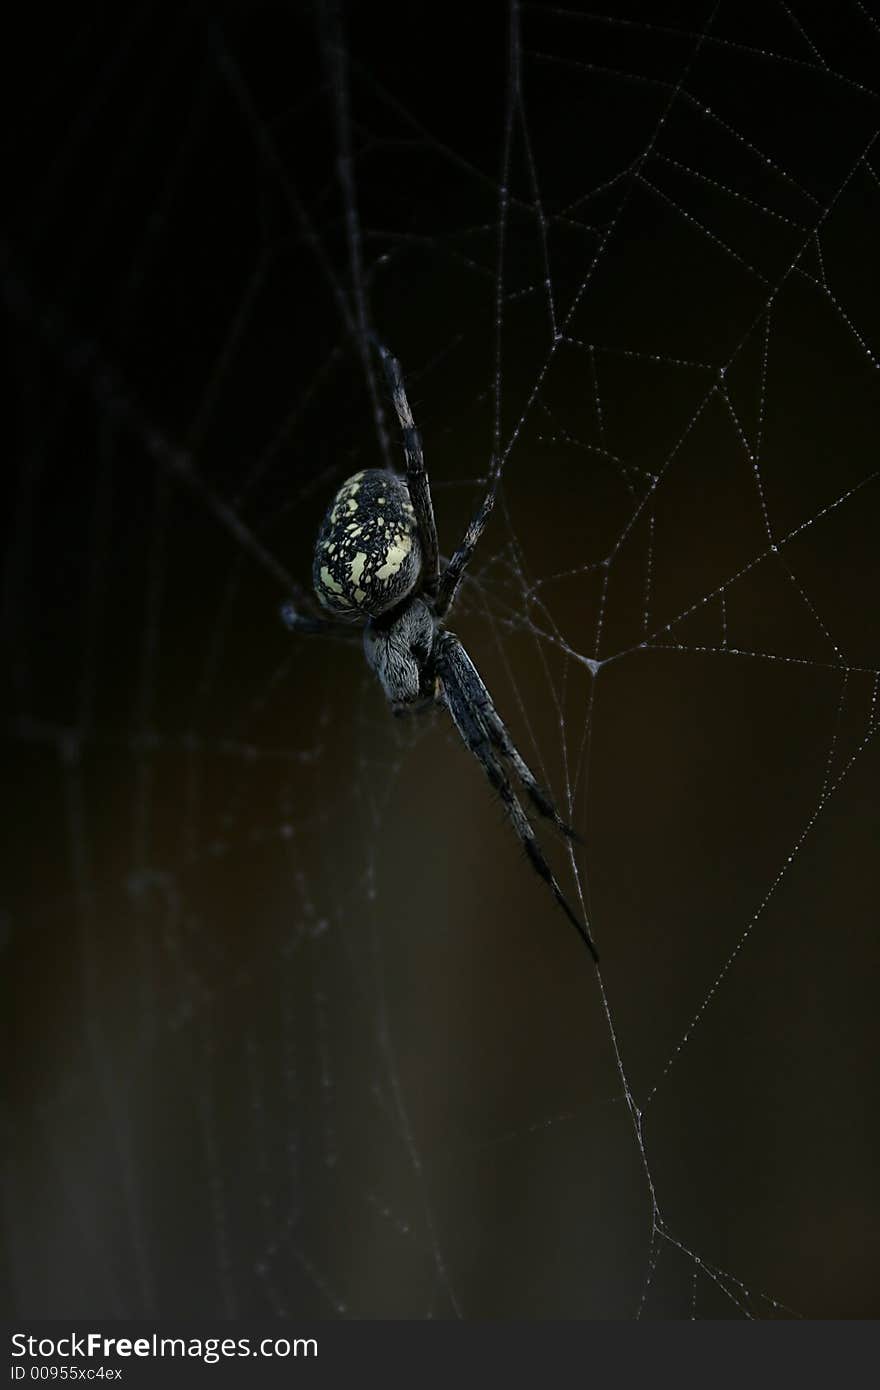 Spider and web images showing web detail and spider behavior.